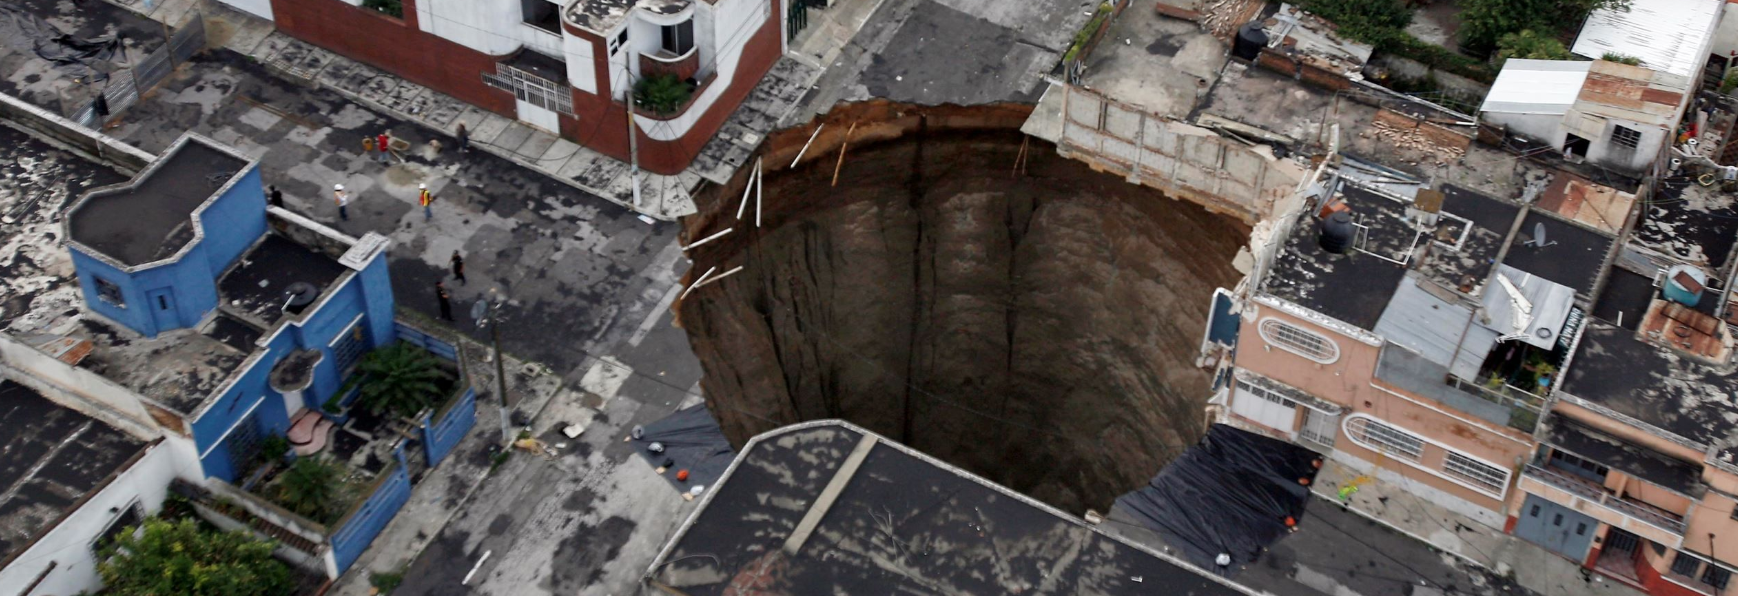 30 Story Deep Sinkhole In Guatemala That Swallowed A Three